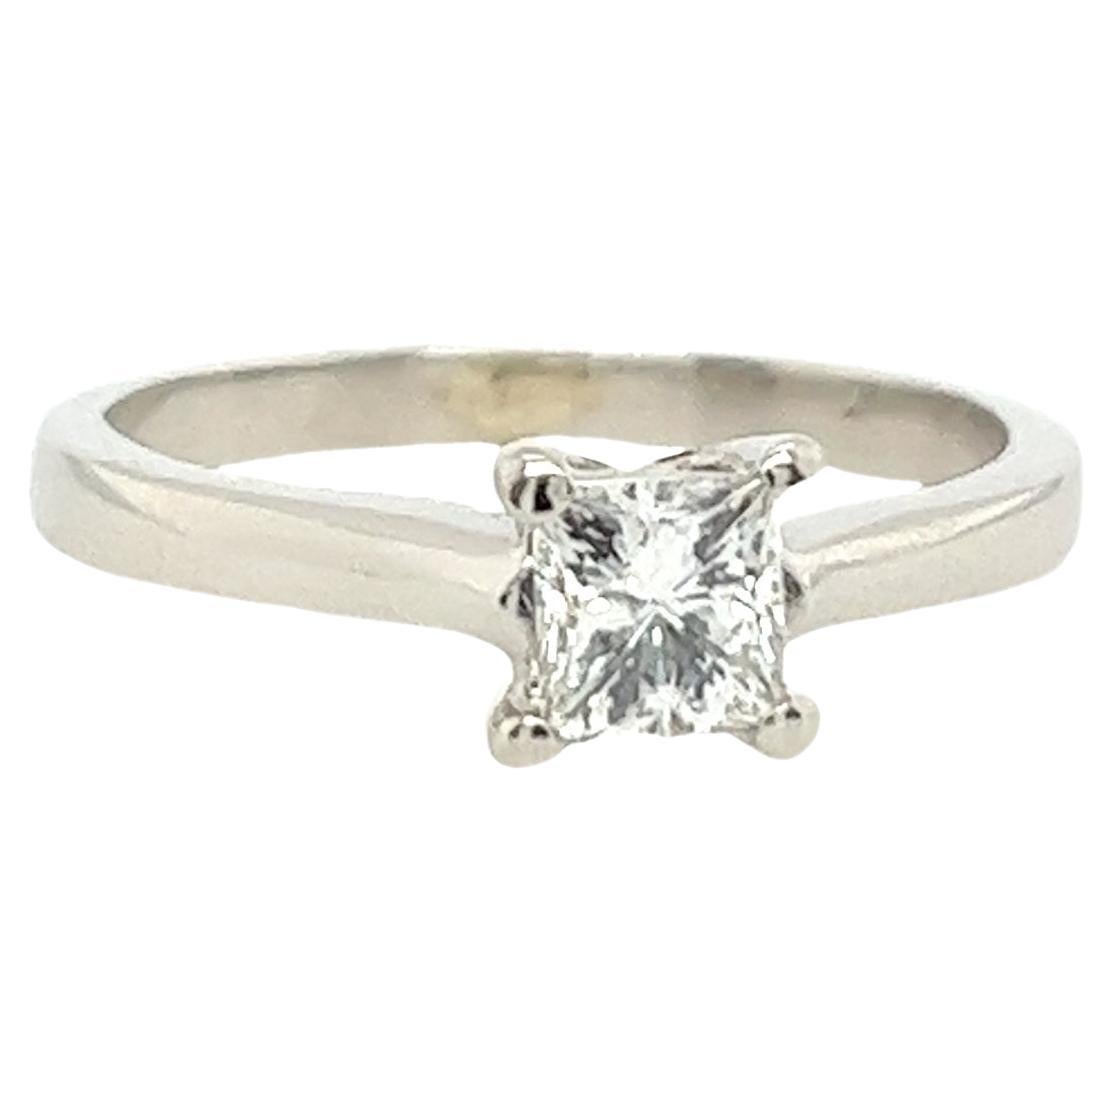 18ct White Gold Solitaire Diamond Ring Set With 0.45ct Princess Cut Diamond For Sale